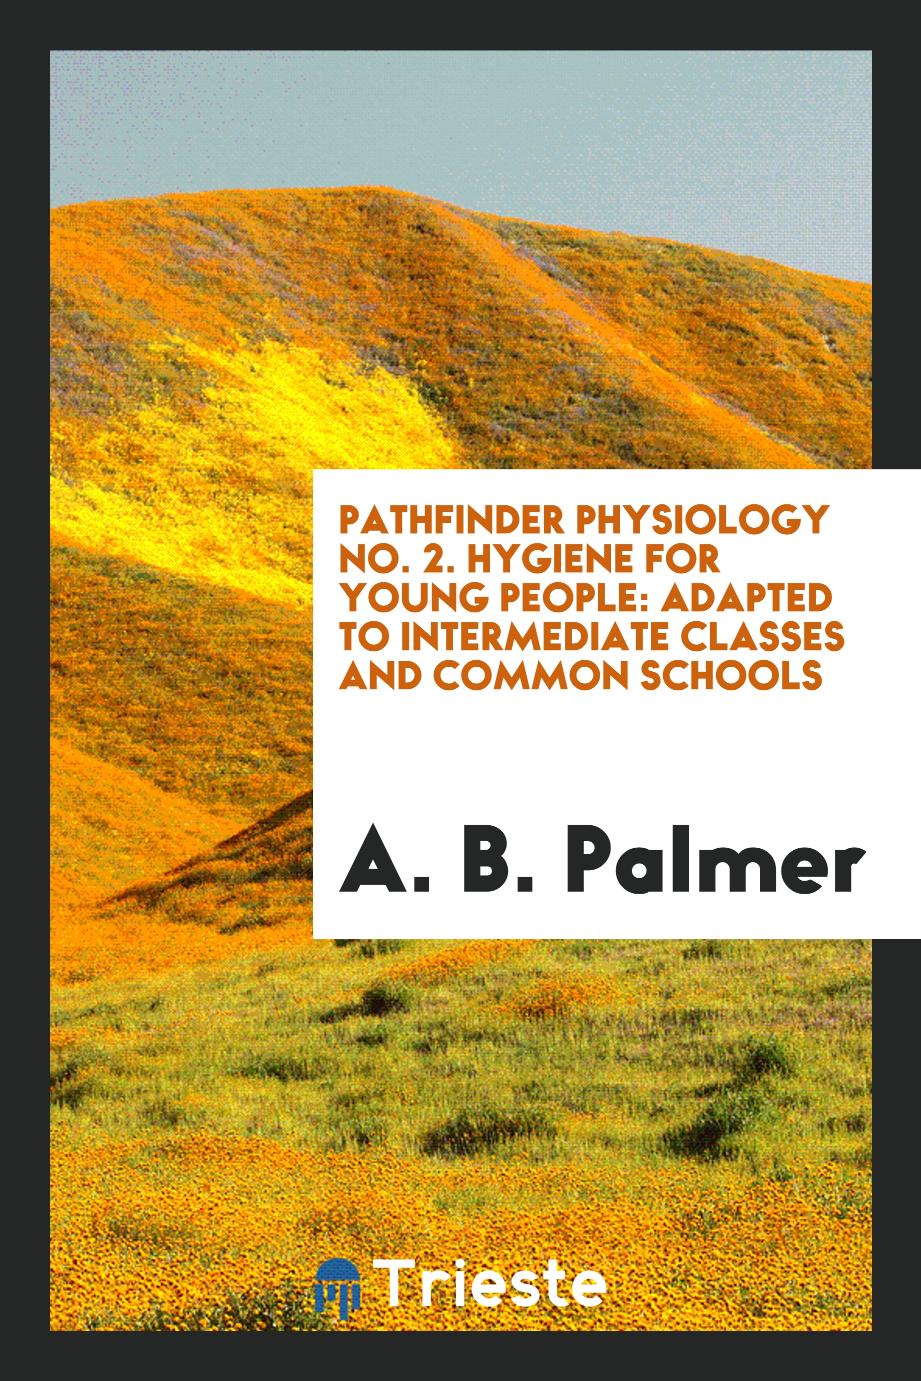 Pathfinder Physiology No. 2. Hygiene for Young People: Adapted to Intermediate Classes and Common Schools